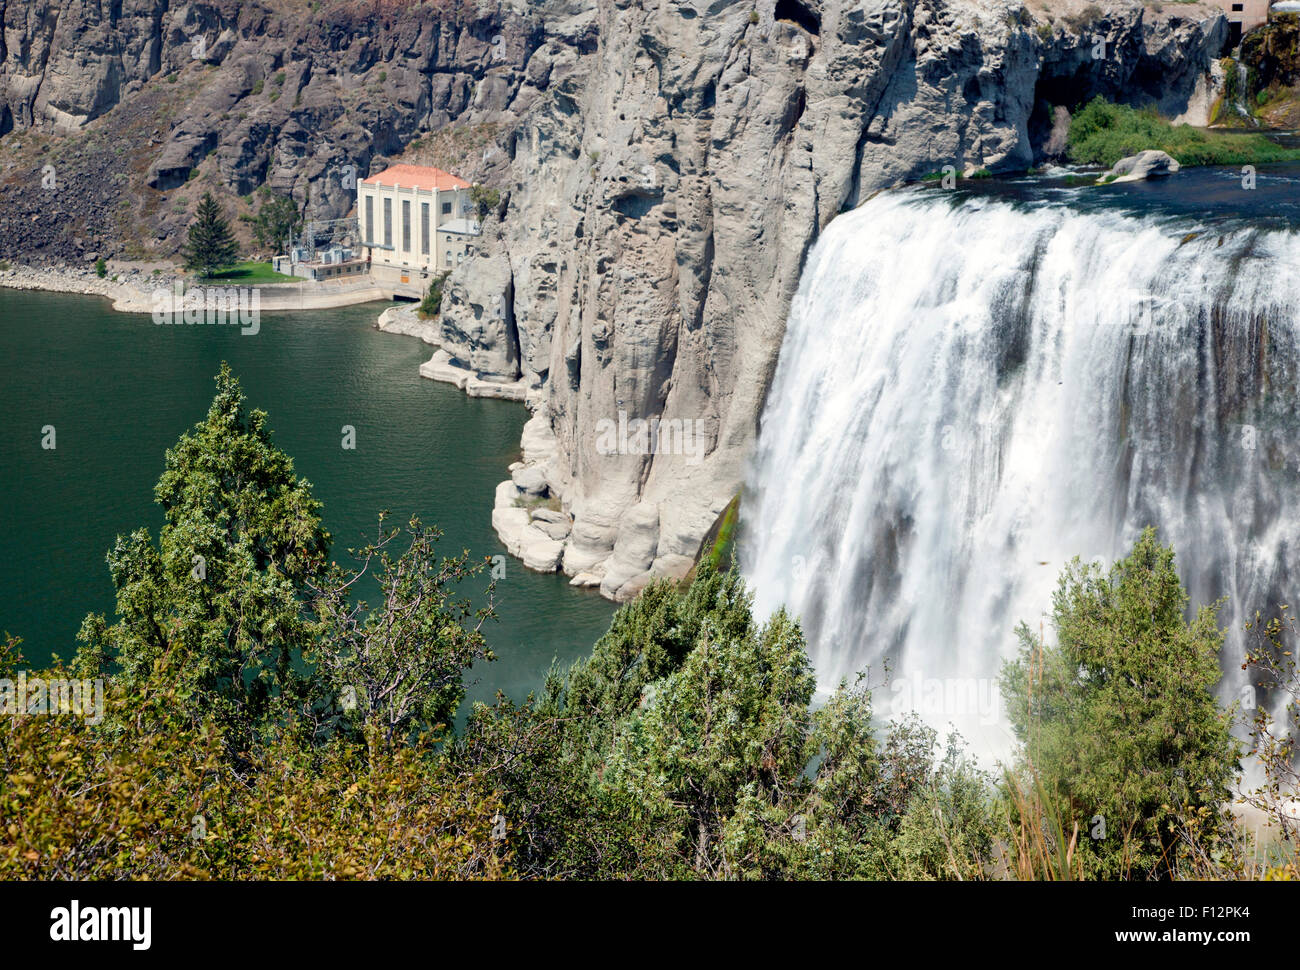 Shoshone Falls, Snake River Canyon, with Hydroelectric power house, Idaho, 2015. Stock Photo